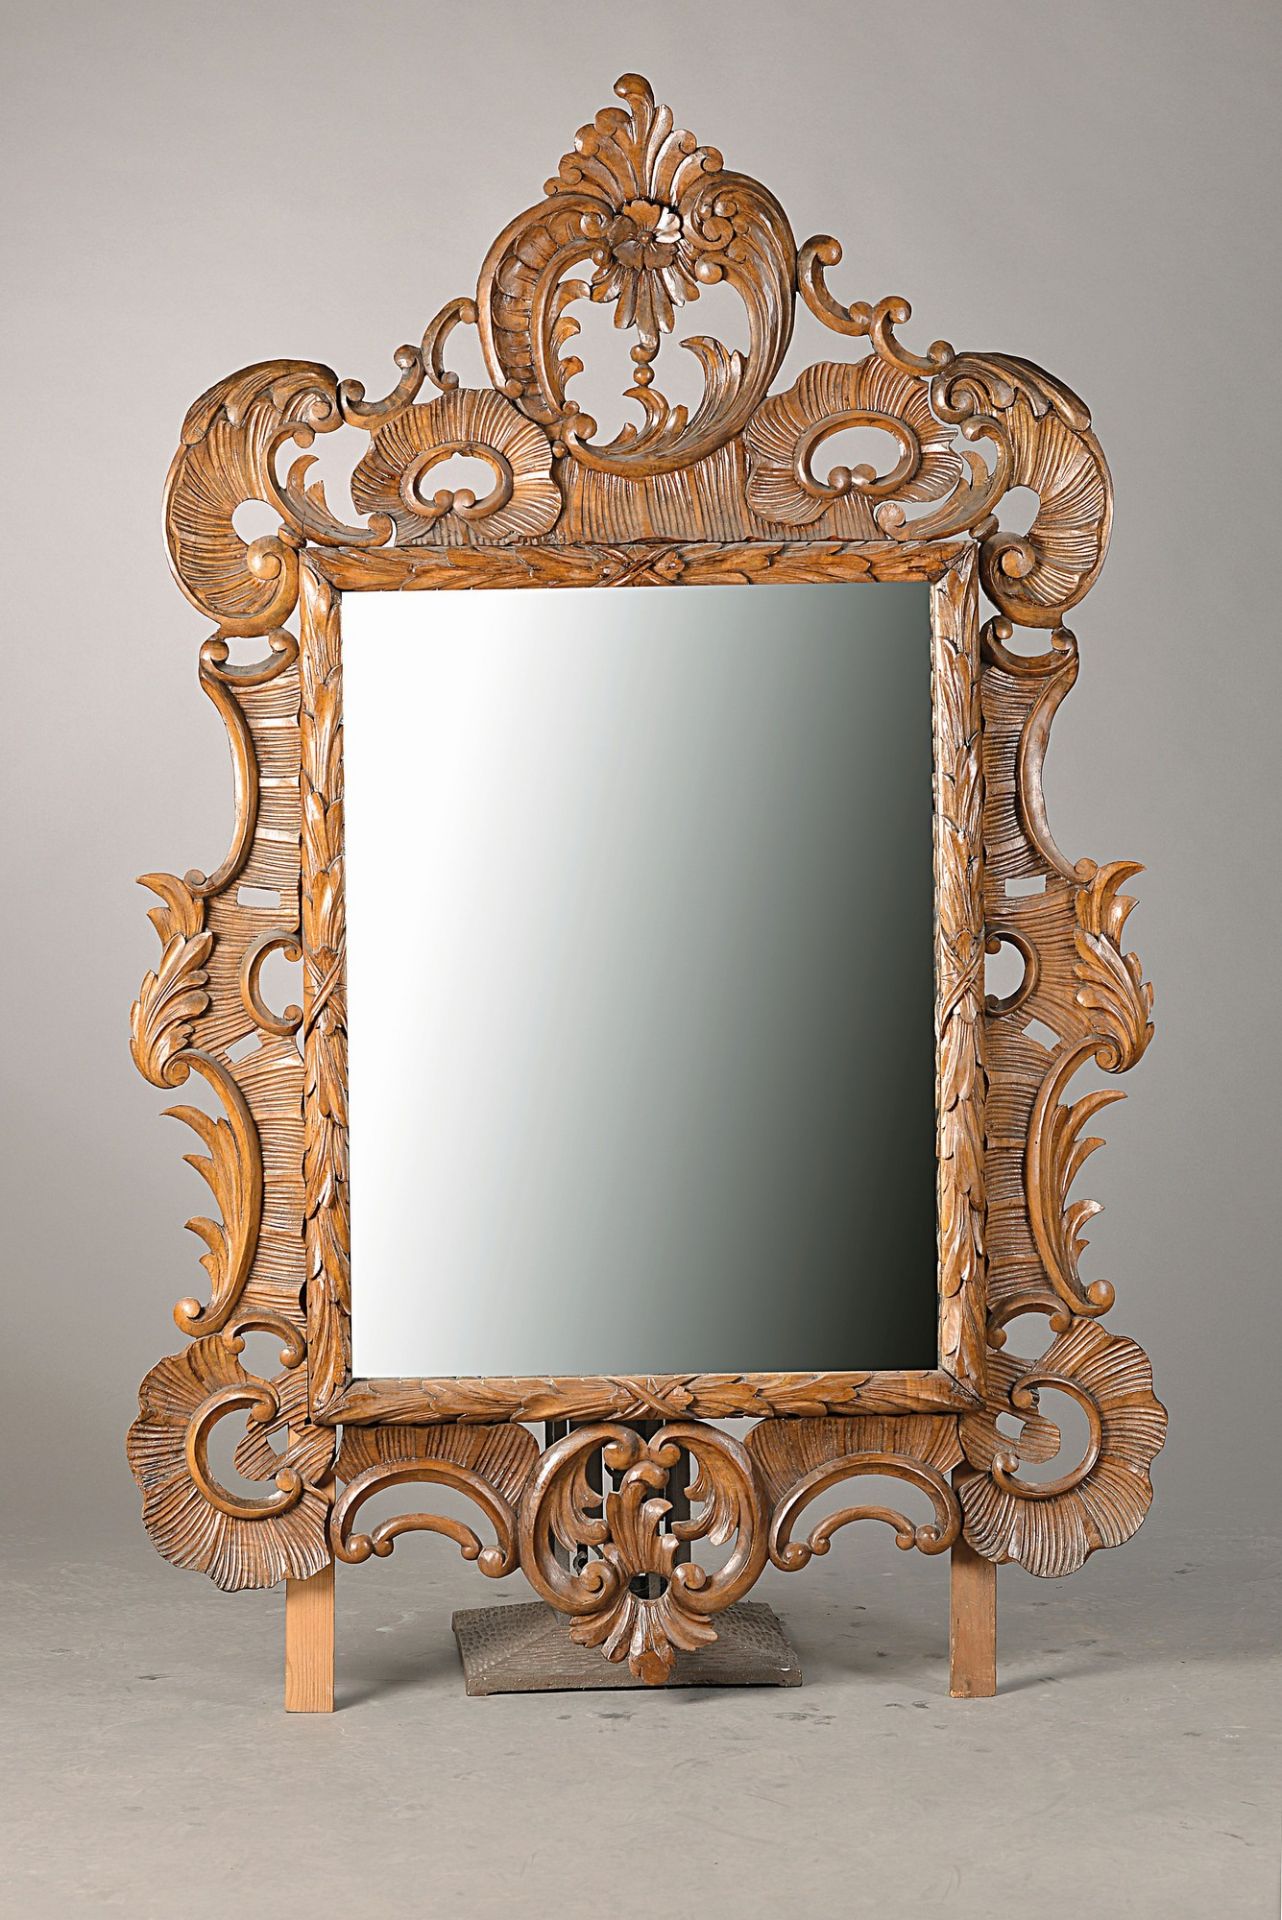 Large Wall mirror, Southern Germany, 19th c., walnut opulent carved with clams, rococo decoration